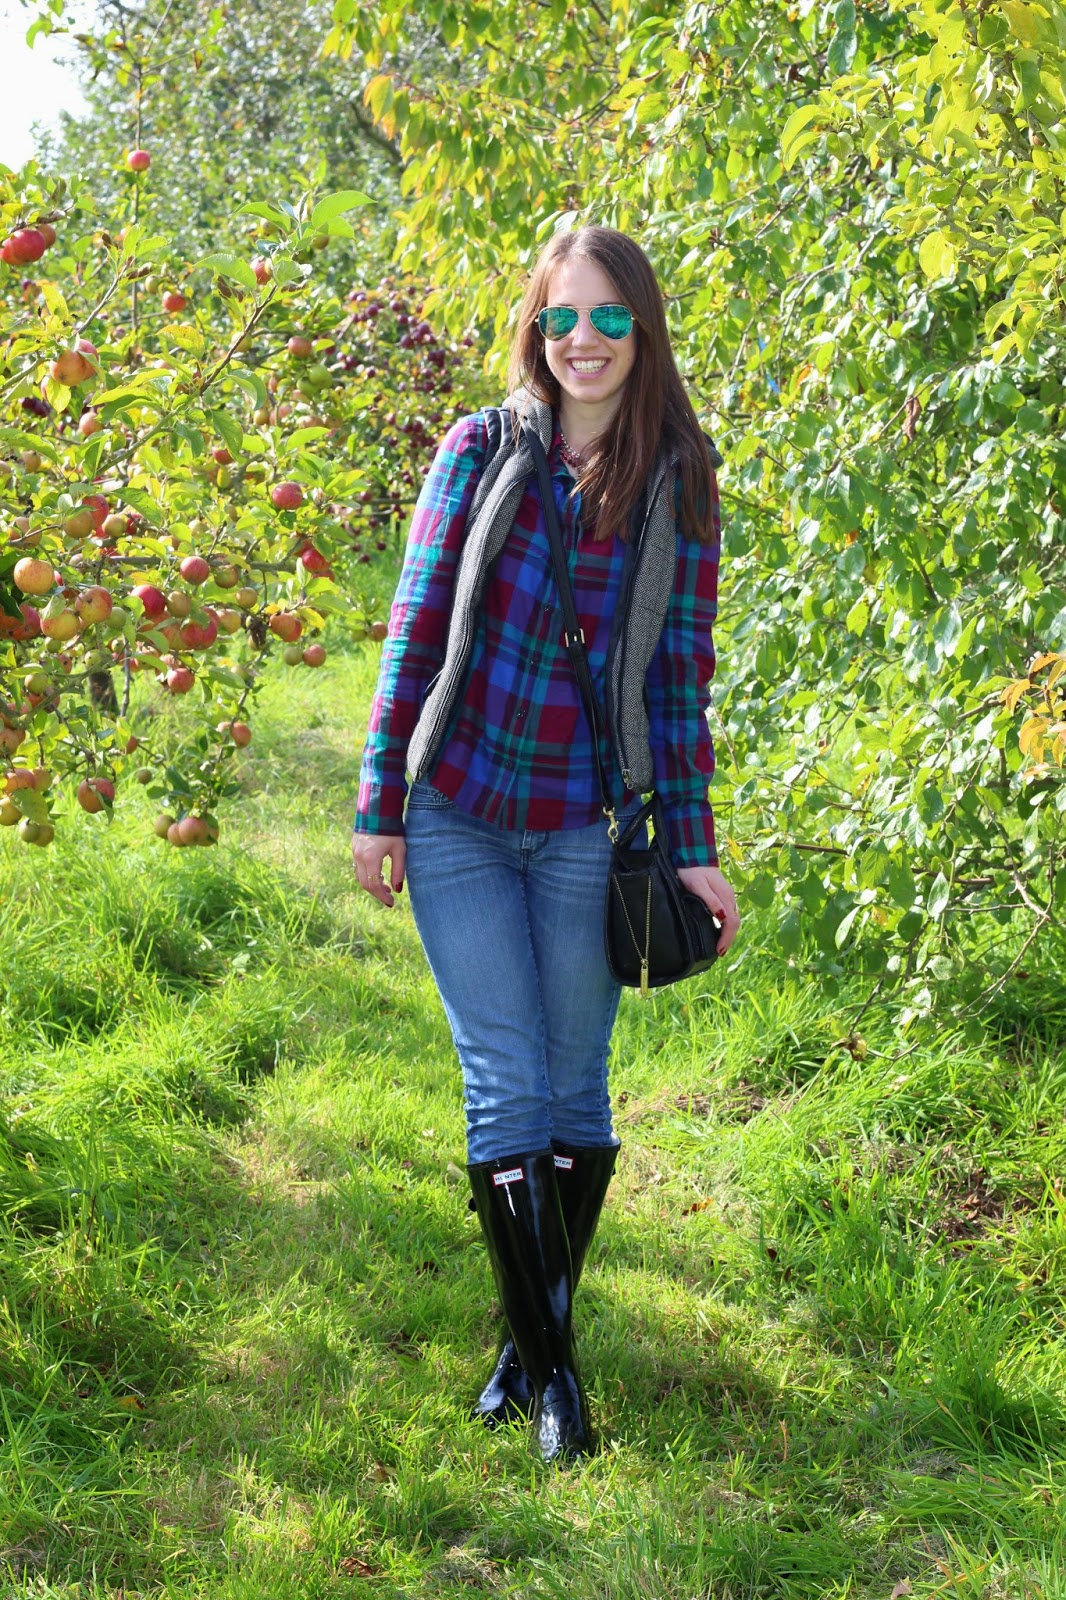 Five Minute Style: Under The Apple Trees